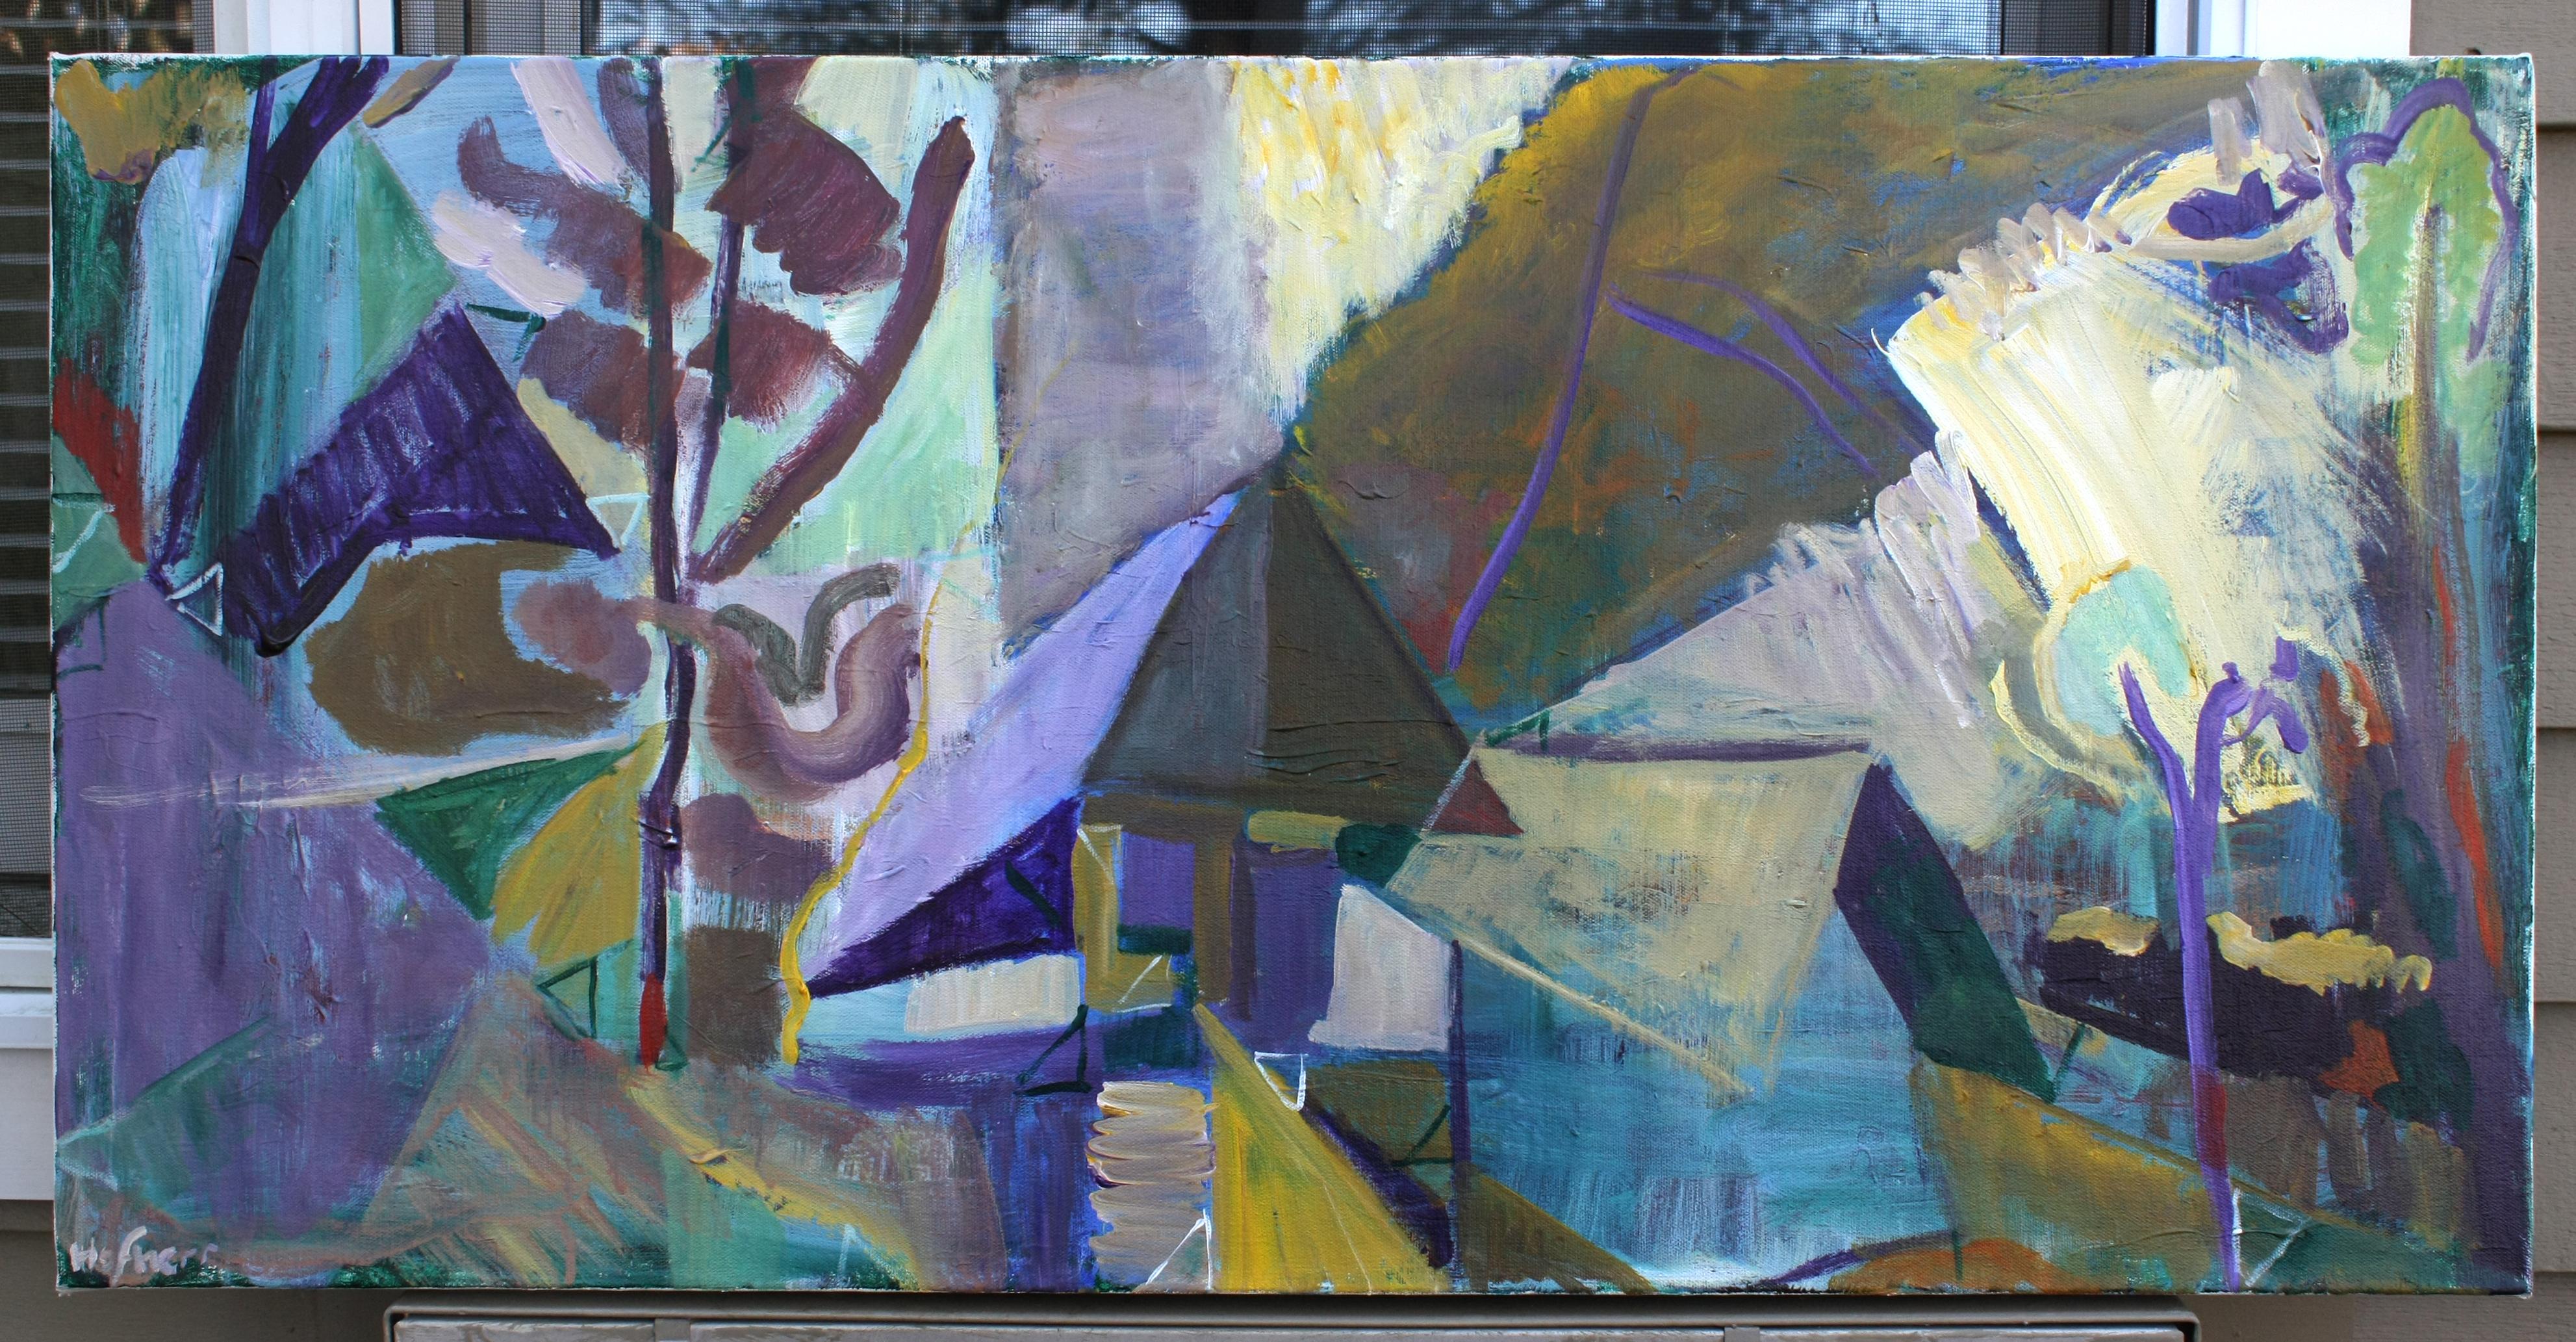 <p>Artist Comments<br>Inspired by Ivon Hitchens' landscapes, this artwork employs various techniques to transform reality. Triangular shapes, both overt and concealed, dominate the composition, preventing it from becoming overly representational.